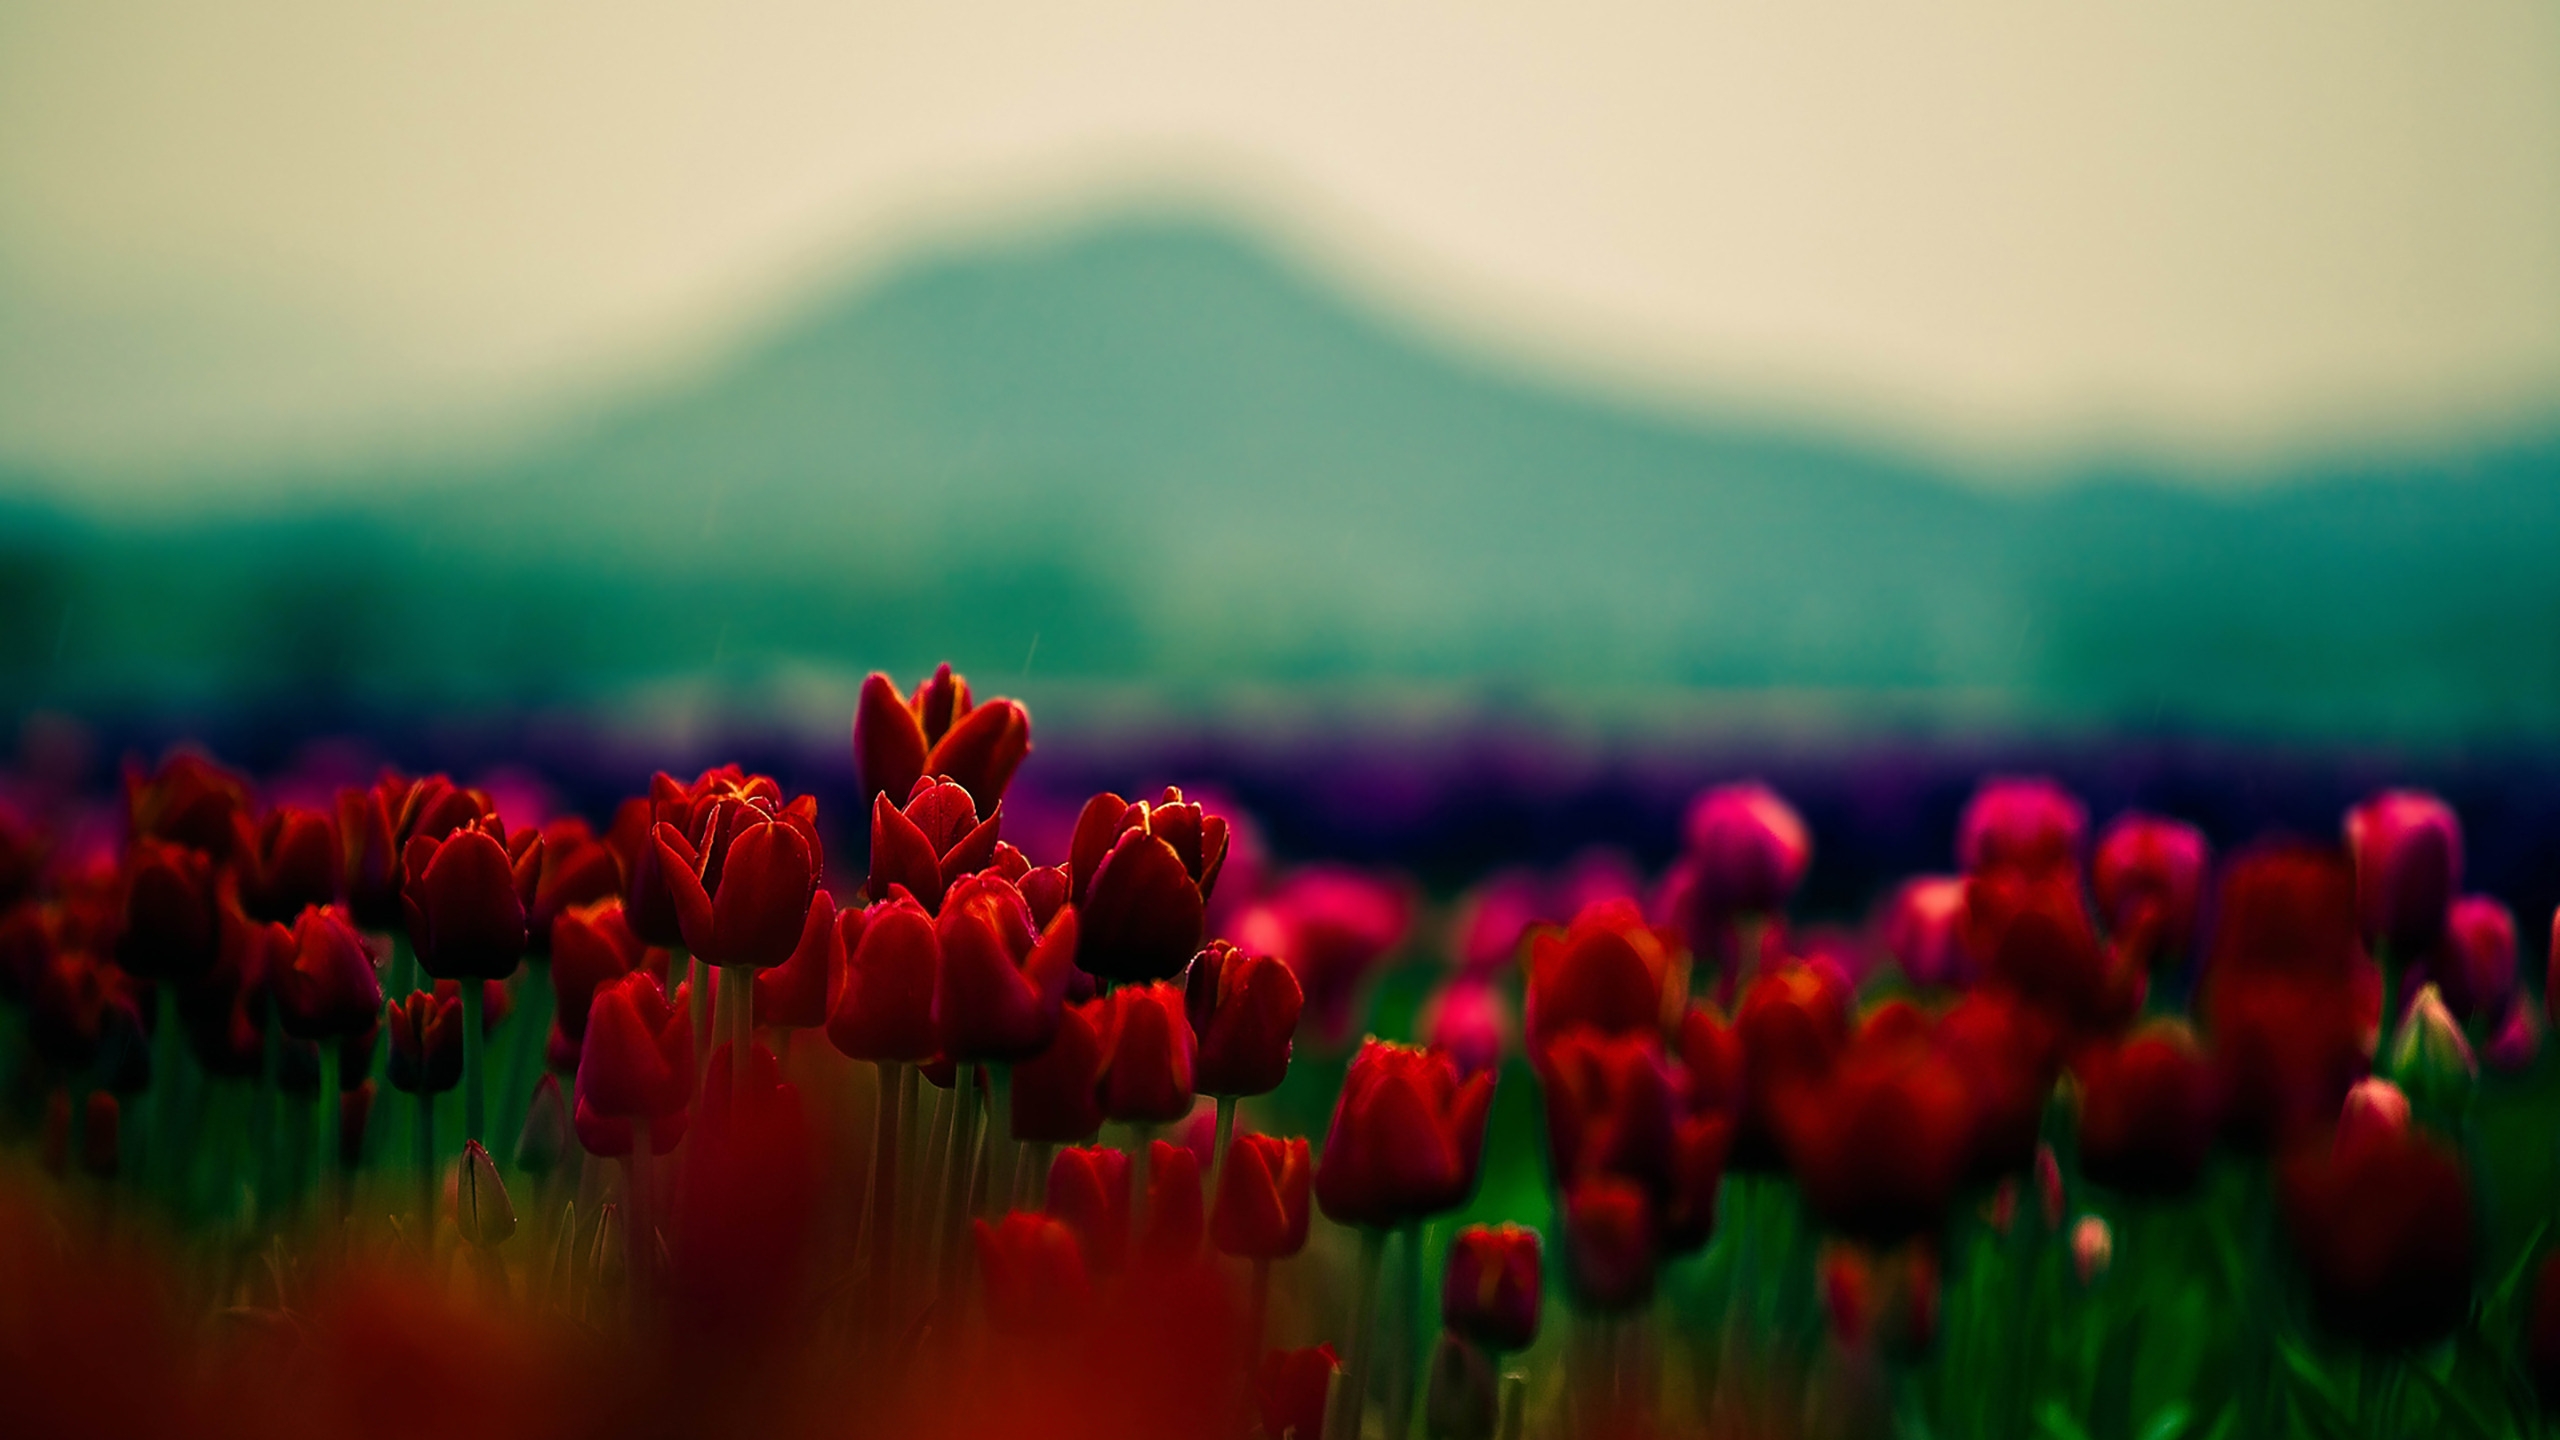 Gorgeous Red Tulips for 2560x1440 HDTV resolution